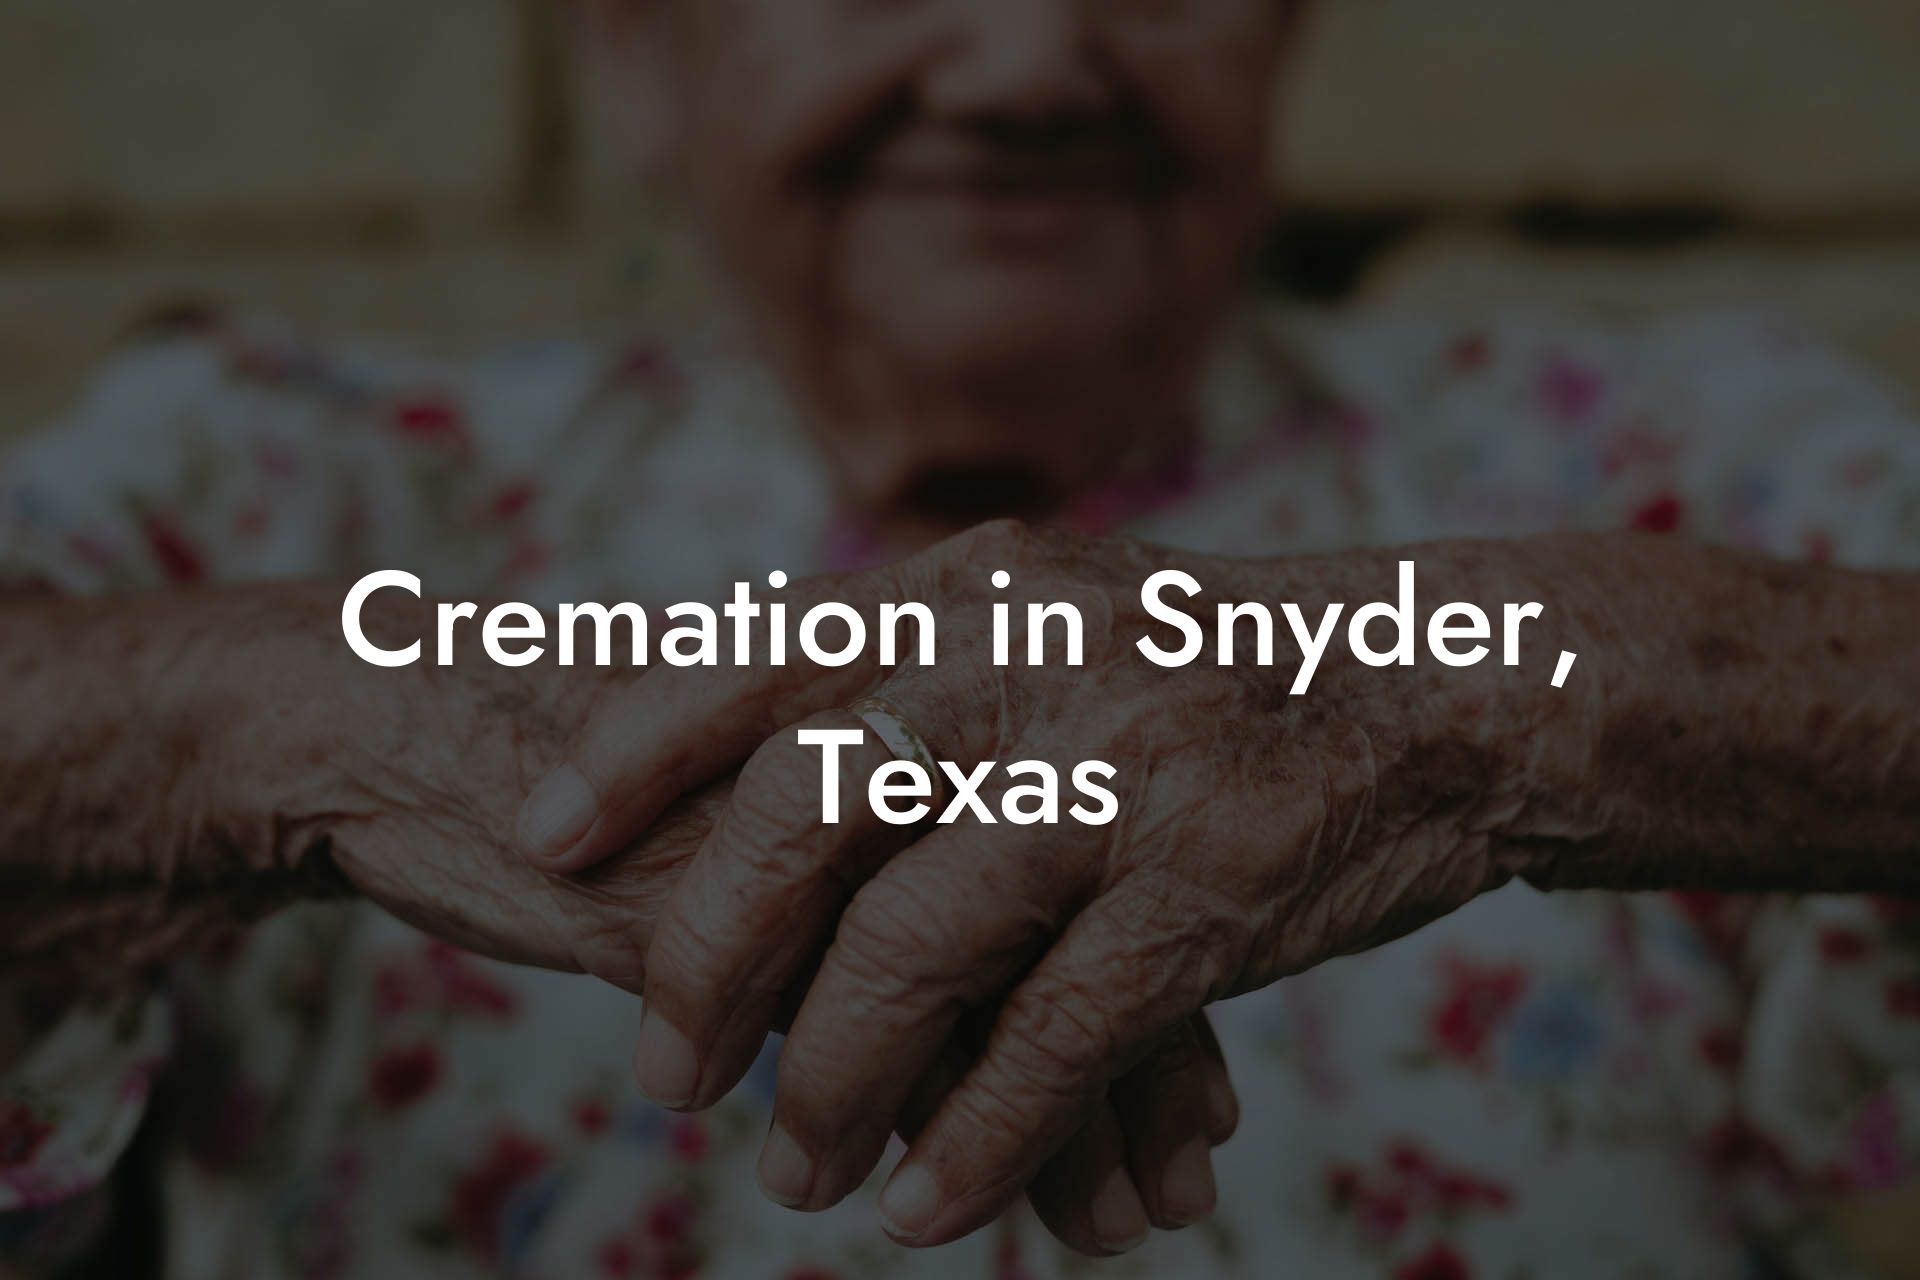 Cremation in Snyder, Texas